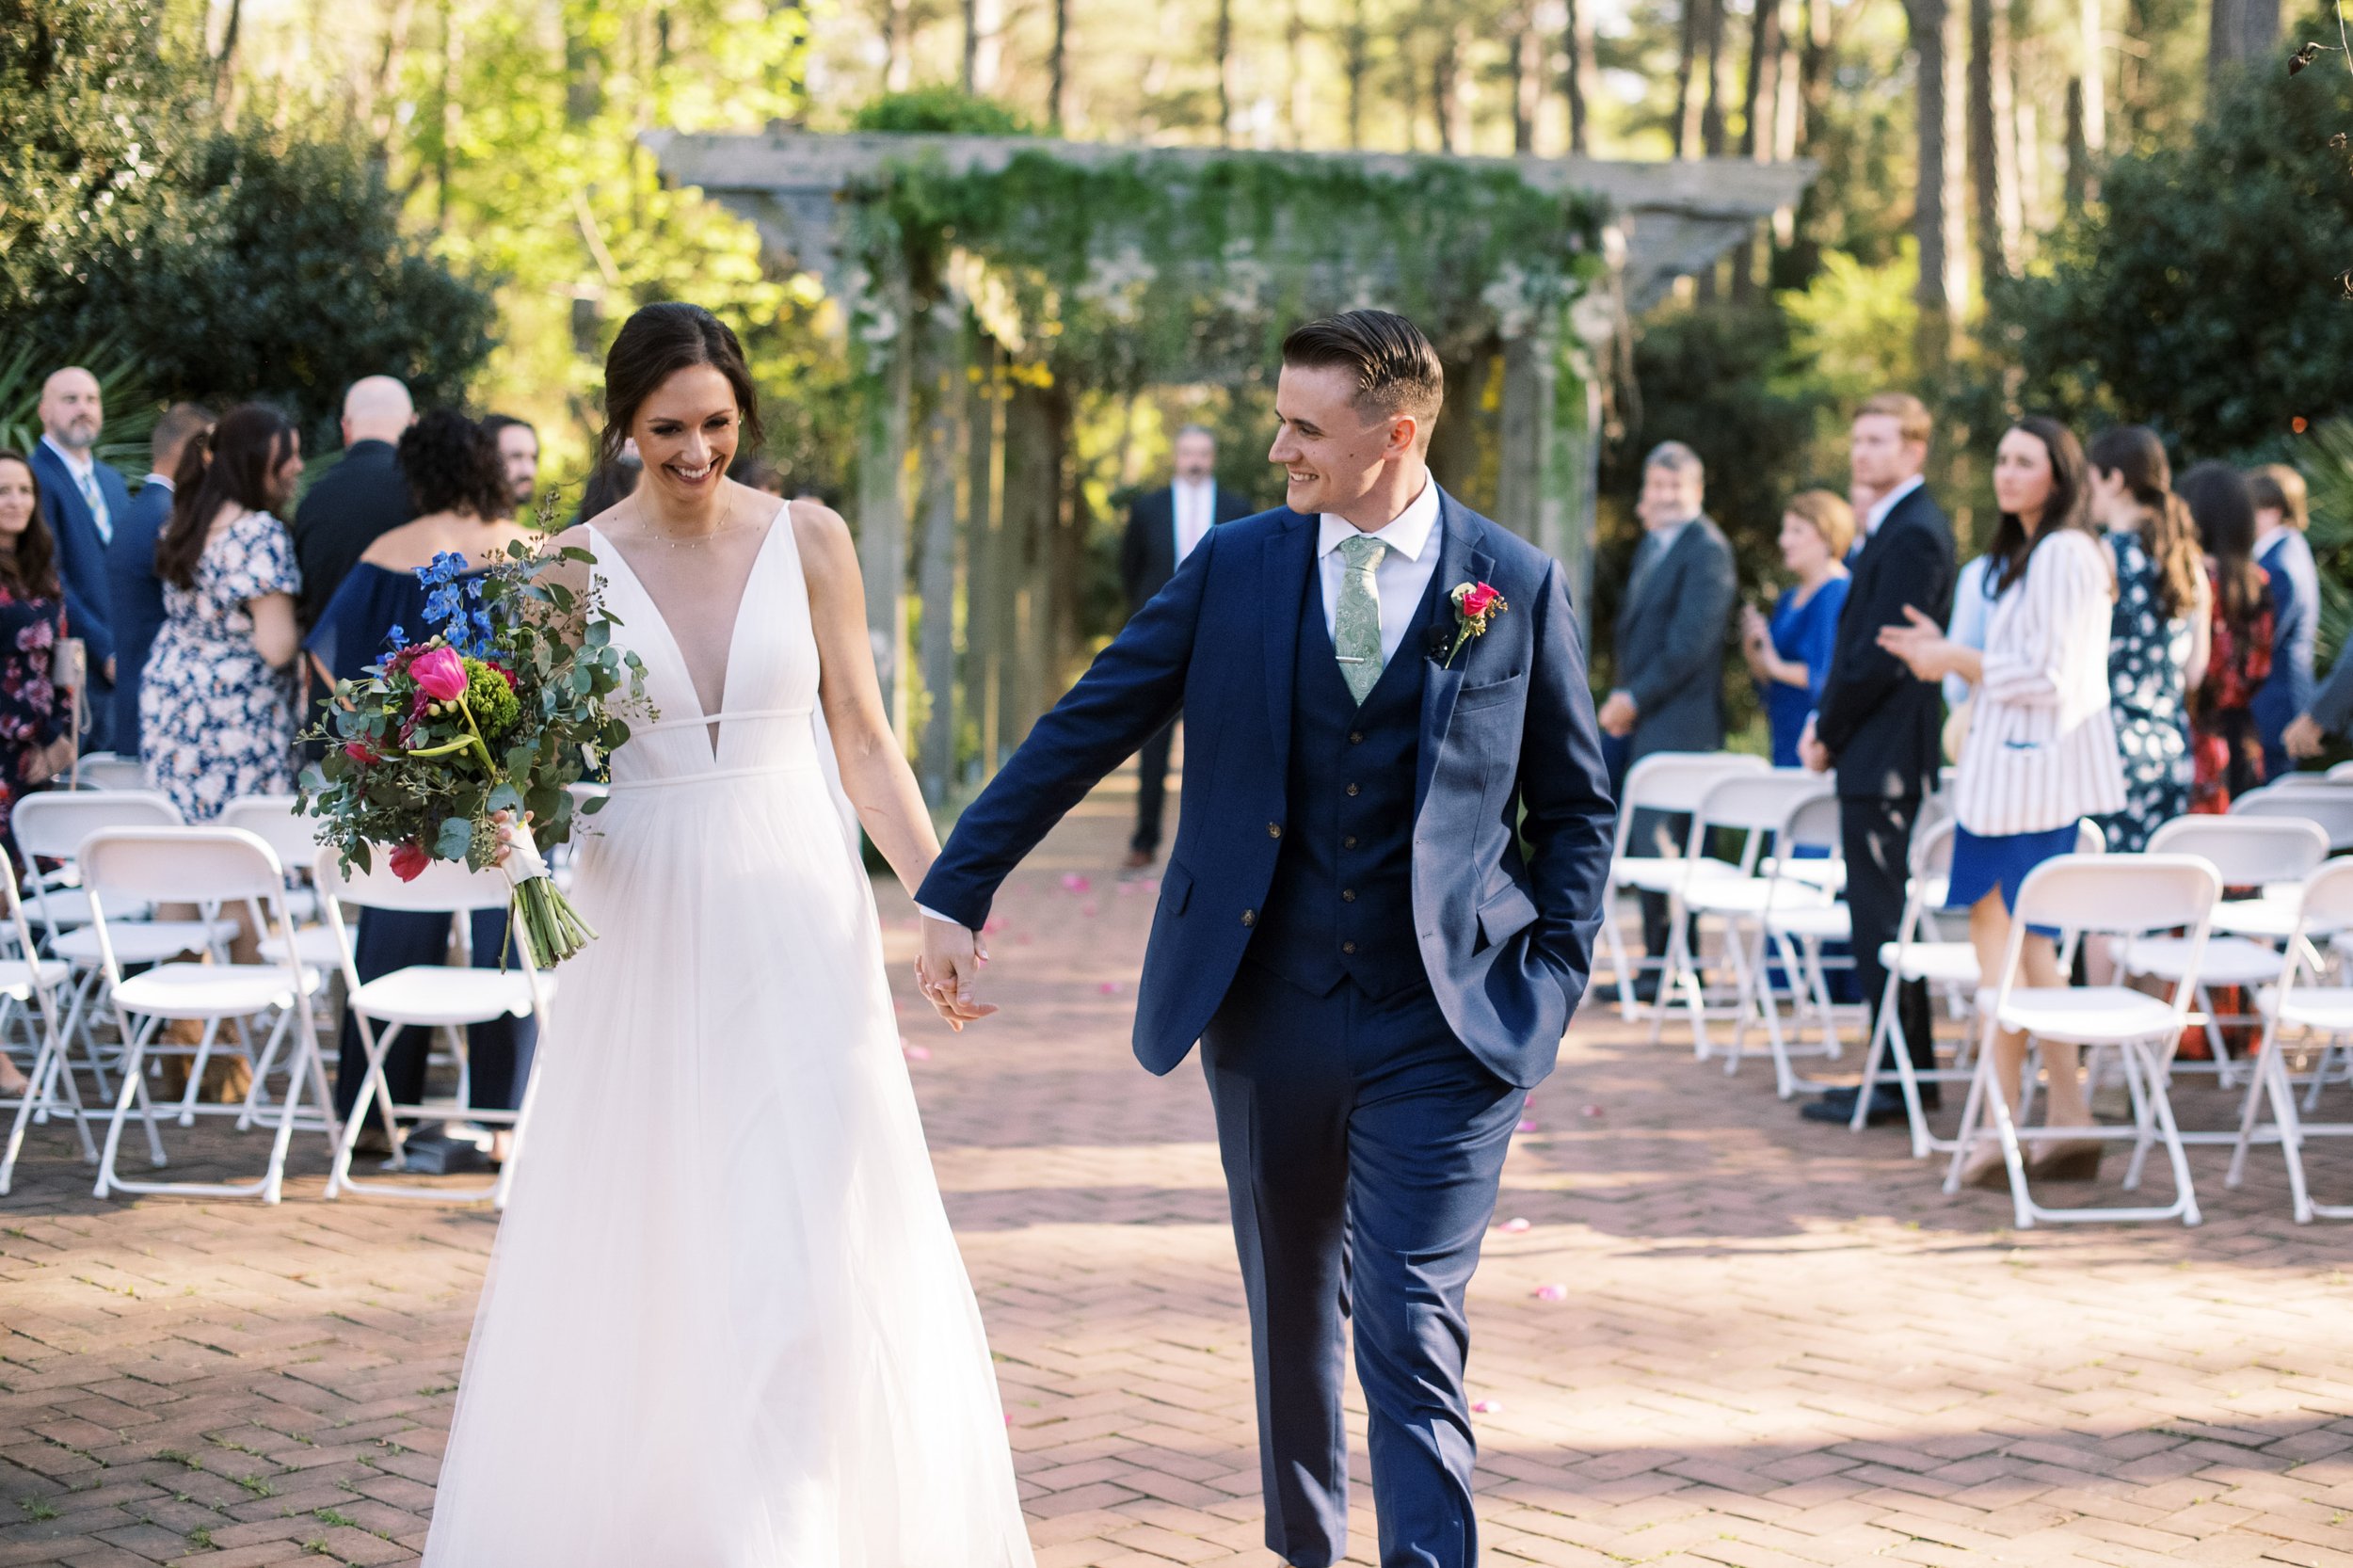  Post Ceremony Bride Groom Cape Fear Botanical Garden Wedding Fancy This Photography